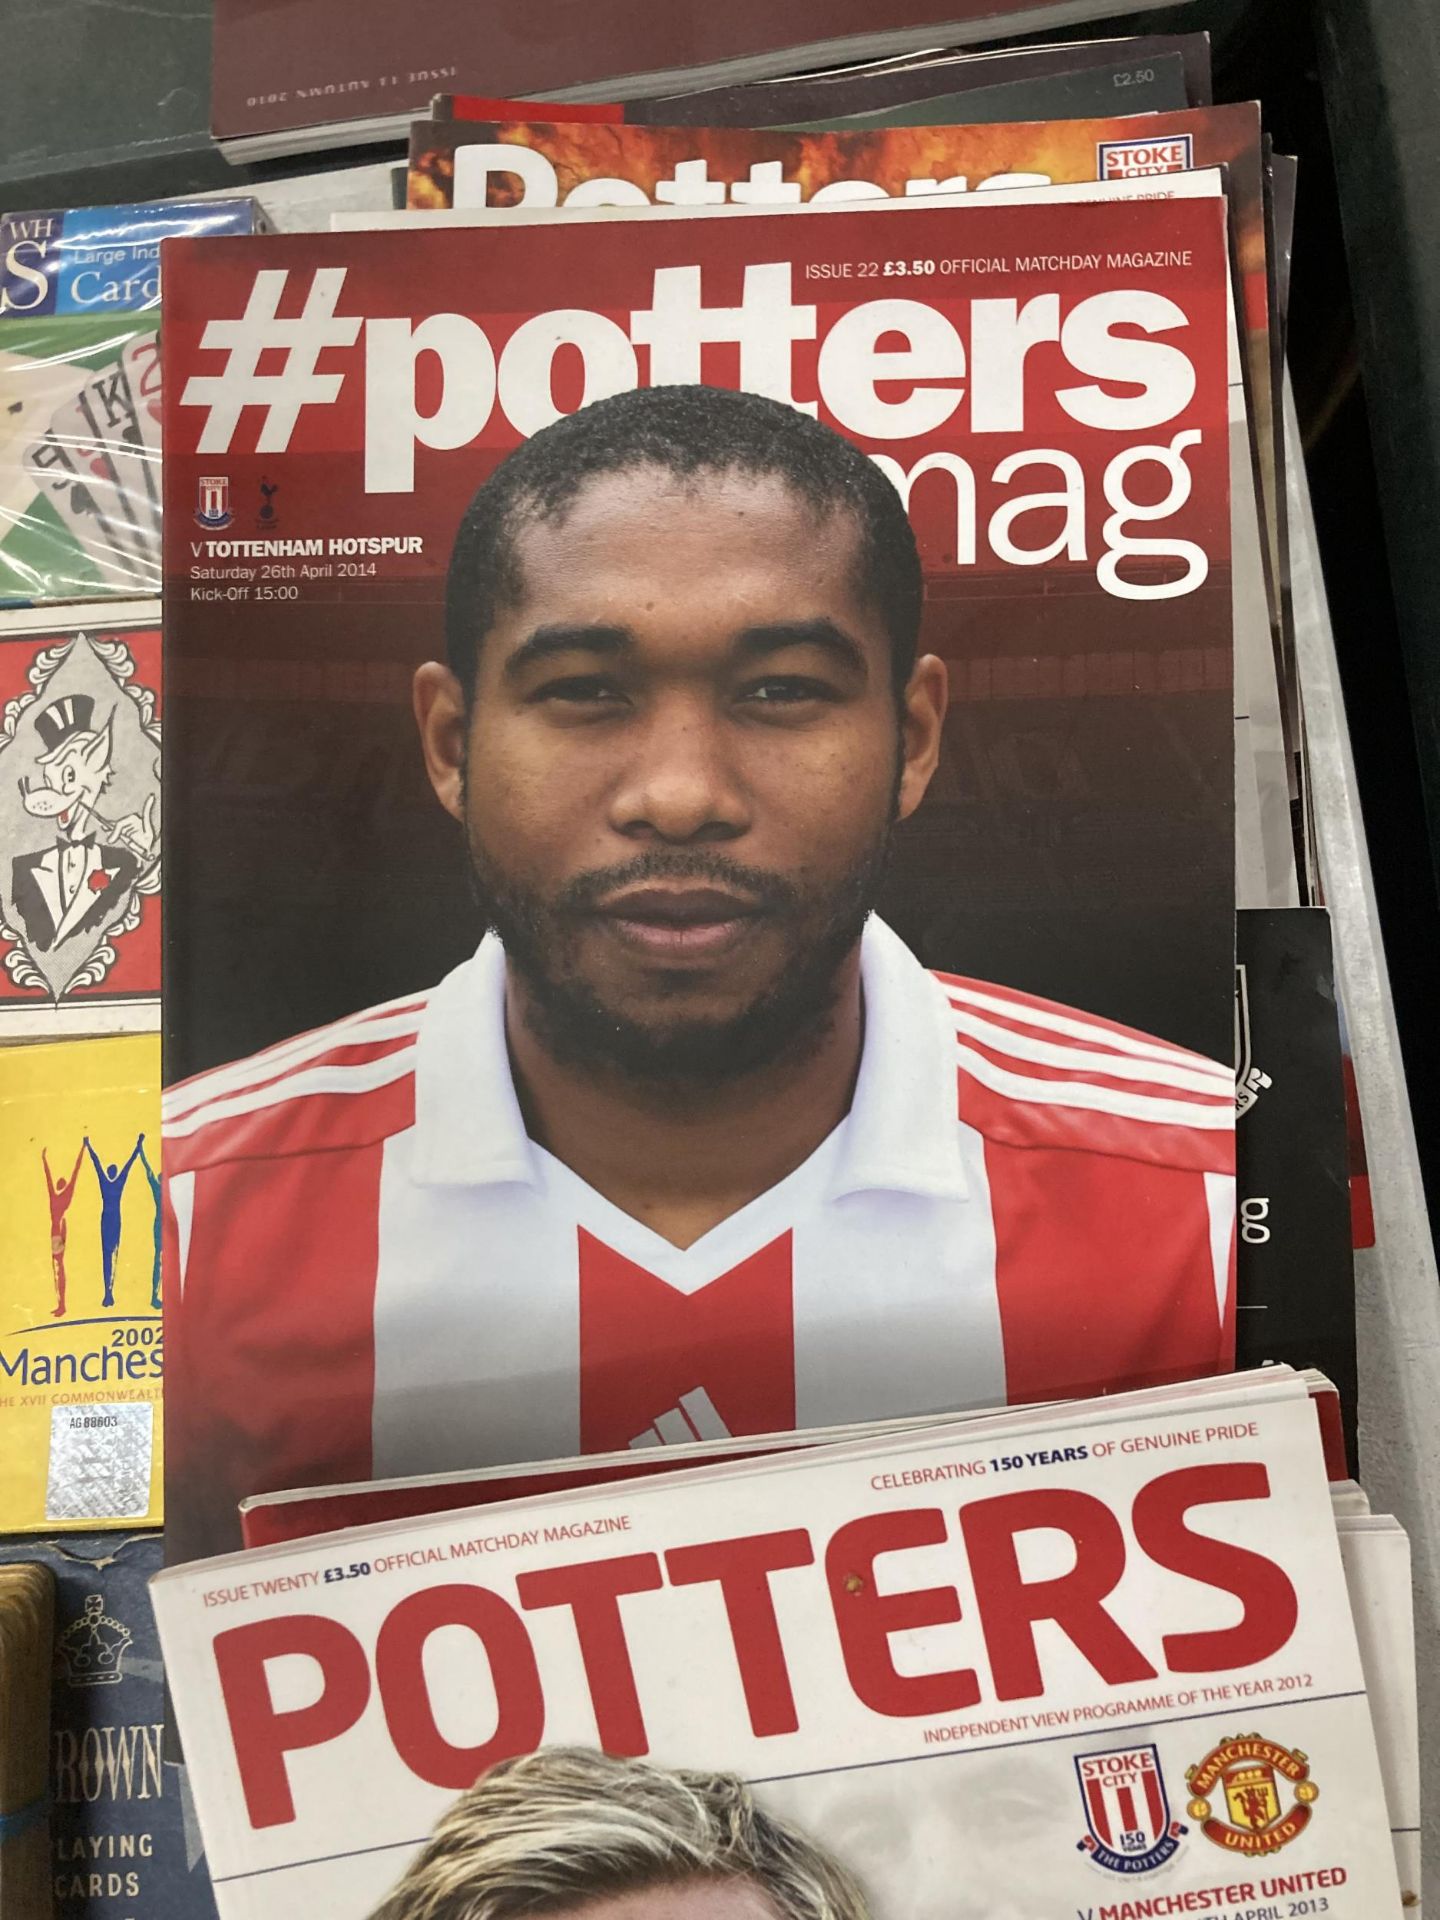 A COLLECTION OF 27 MATCHDAY POTTERS MAGAZINES - Image 4 of 4